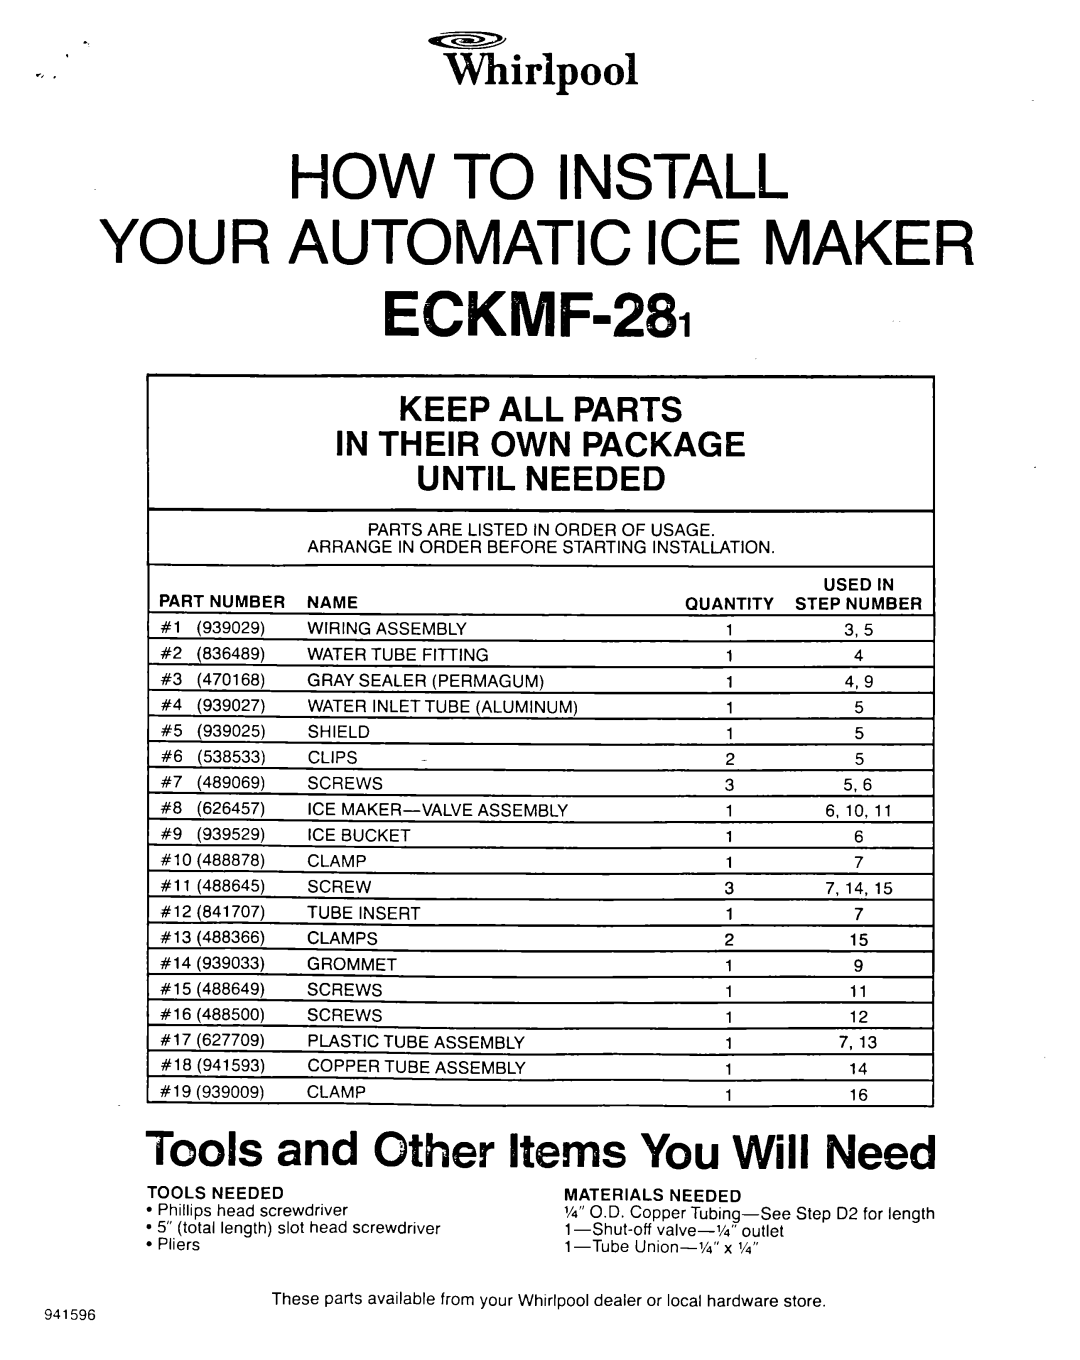 Whirlpool ECKMF-281 manual How To Install Your Automatic Ice Maker, Keep All Parts In Their Own Package Until Needed 